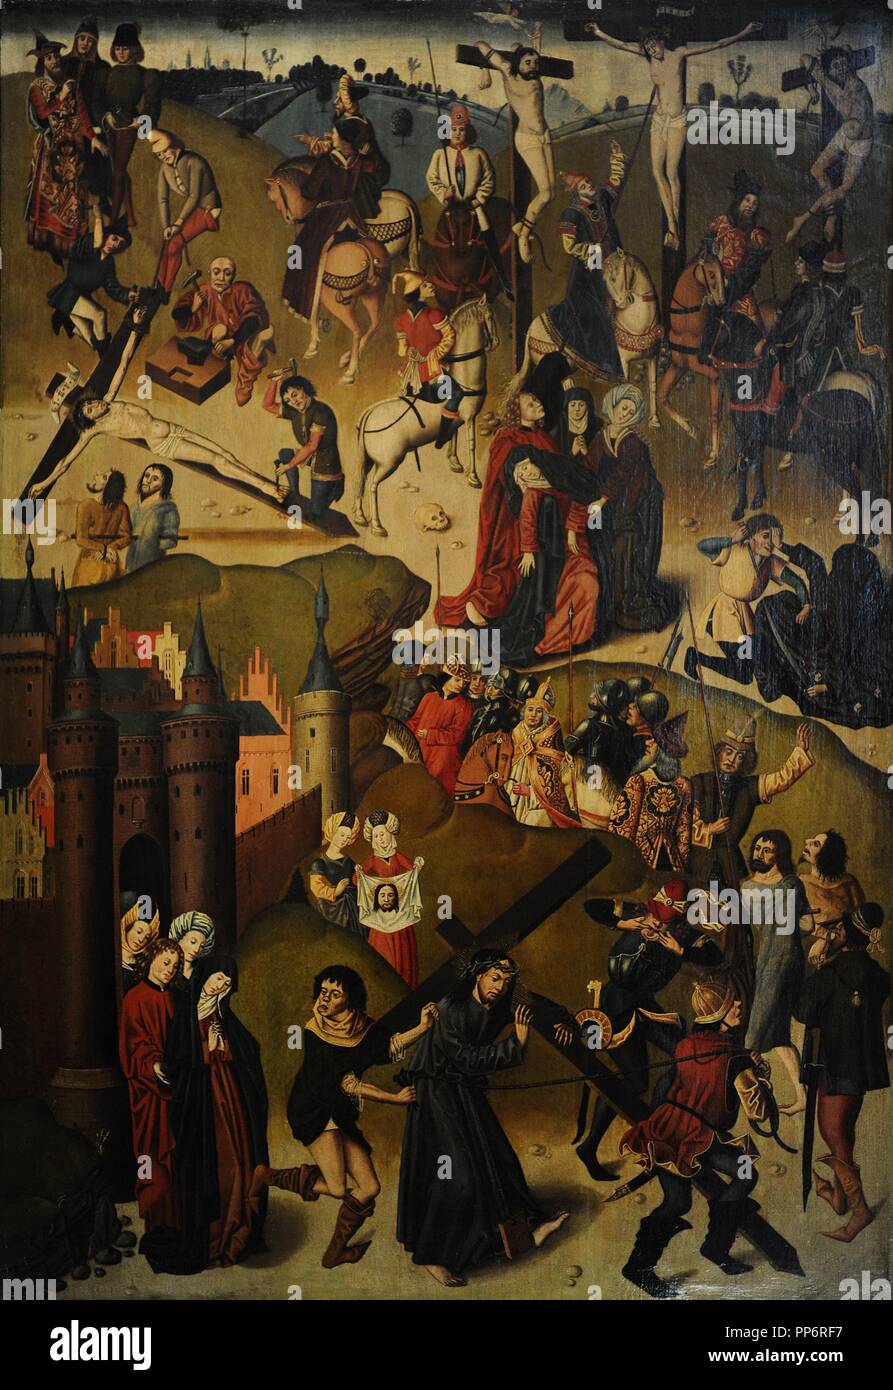 Scenes from the Passion of Christ, ca. 1470. Anonymous. Haarlem?. Catharijneconvent Museum. Utrecht. Netherlands. Stock Photo